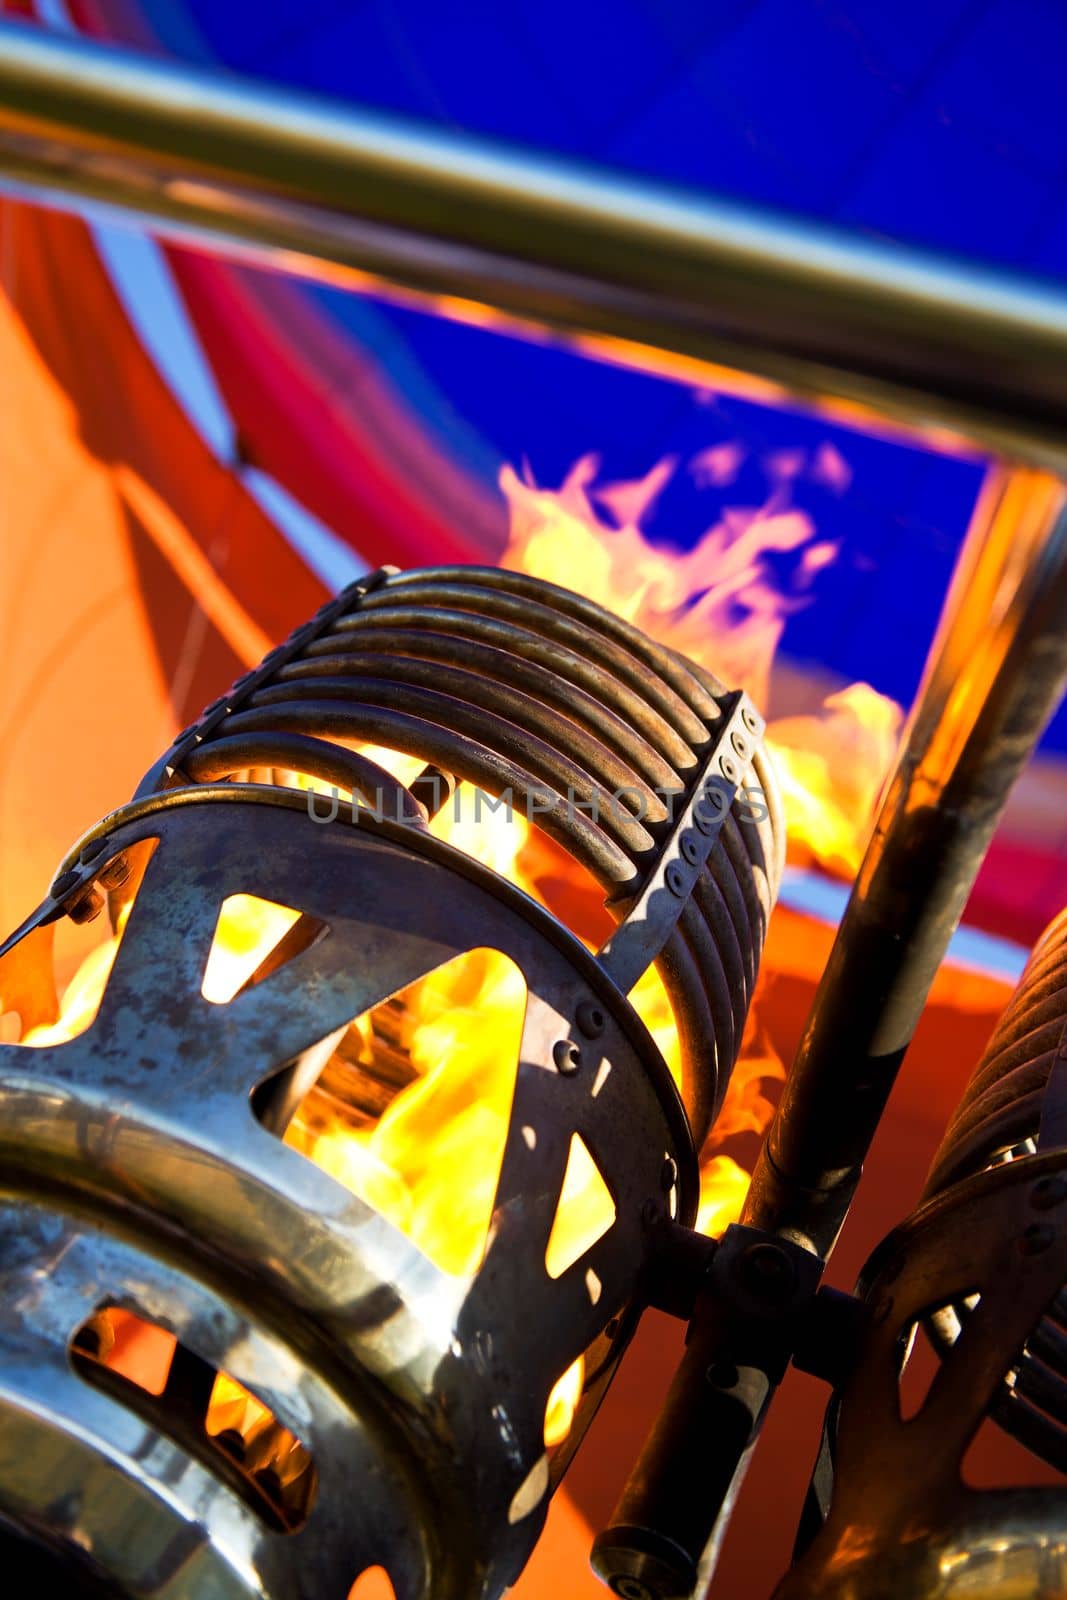 Balloon burner close up with flame